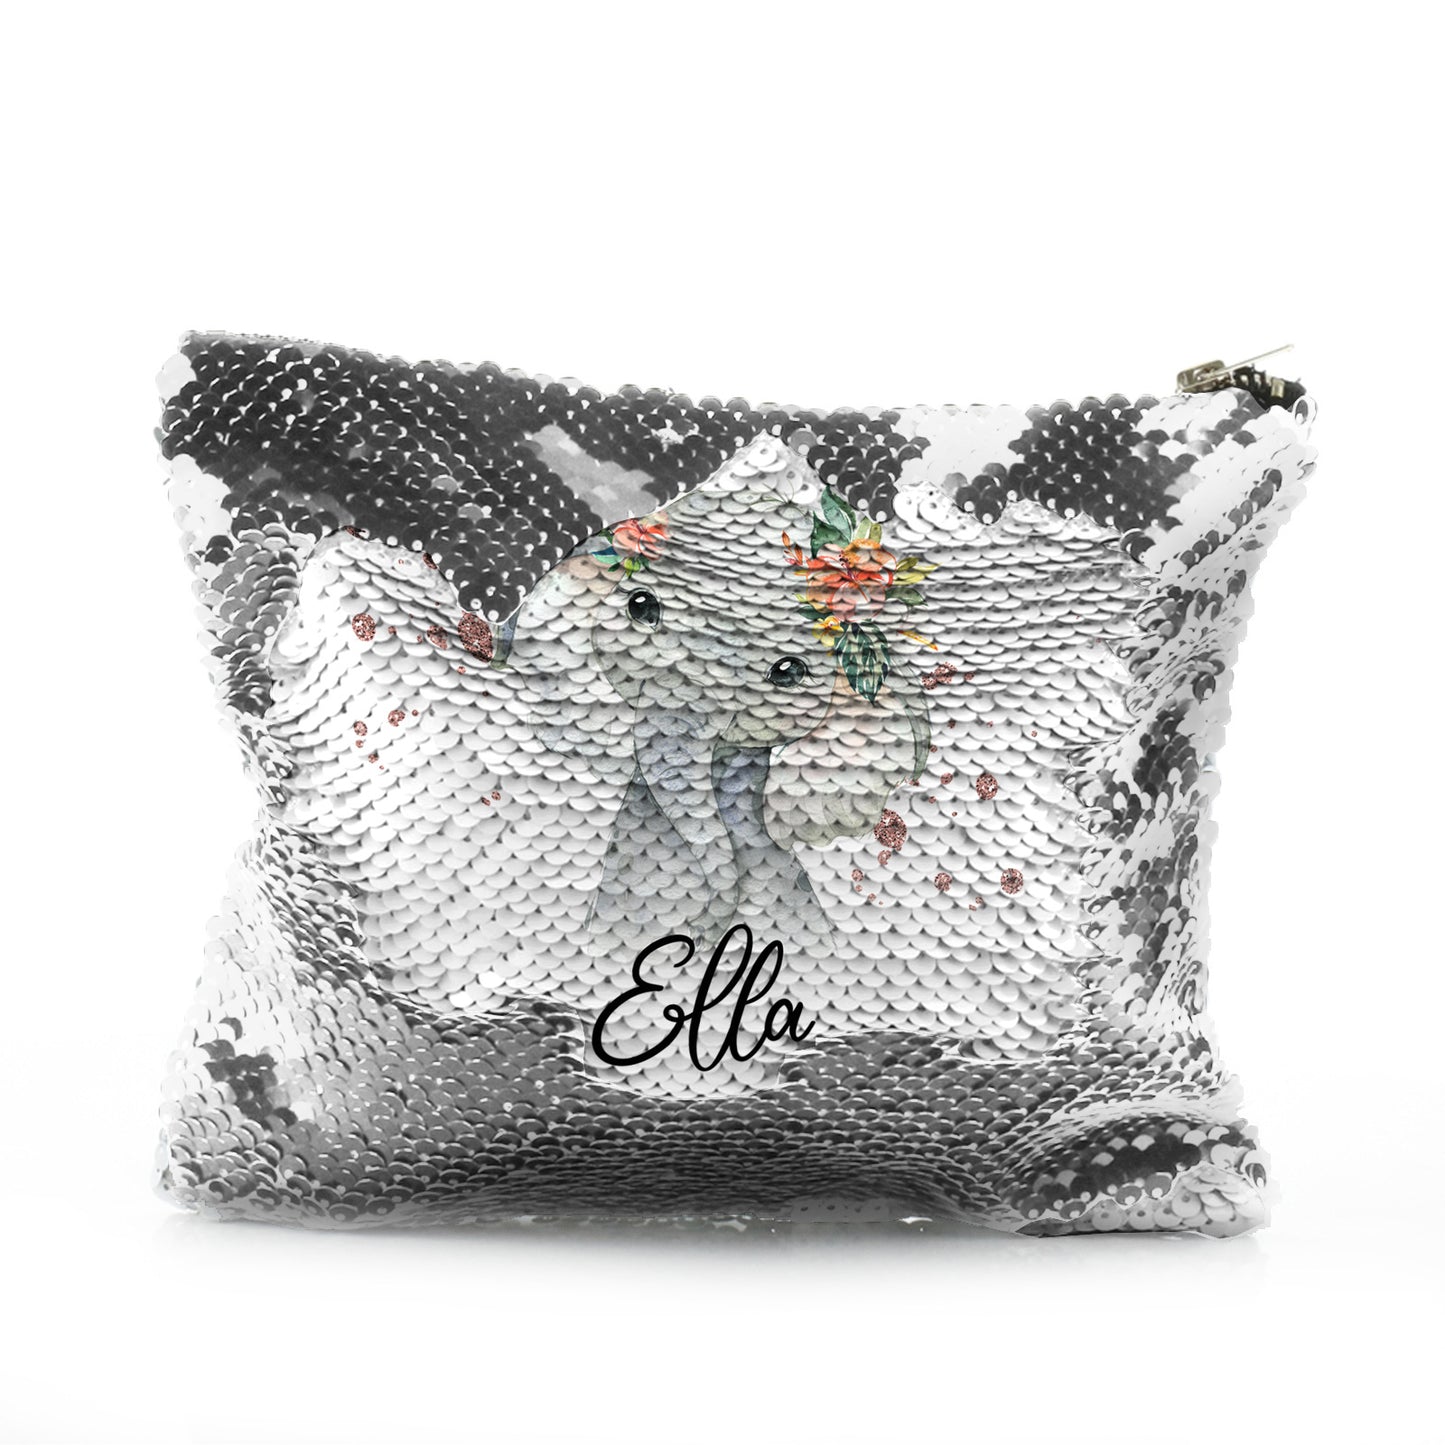 Personalised Sequin Zip Bag with Elephant Rain Drop Glitter Print and Cute Text